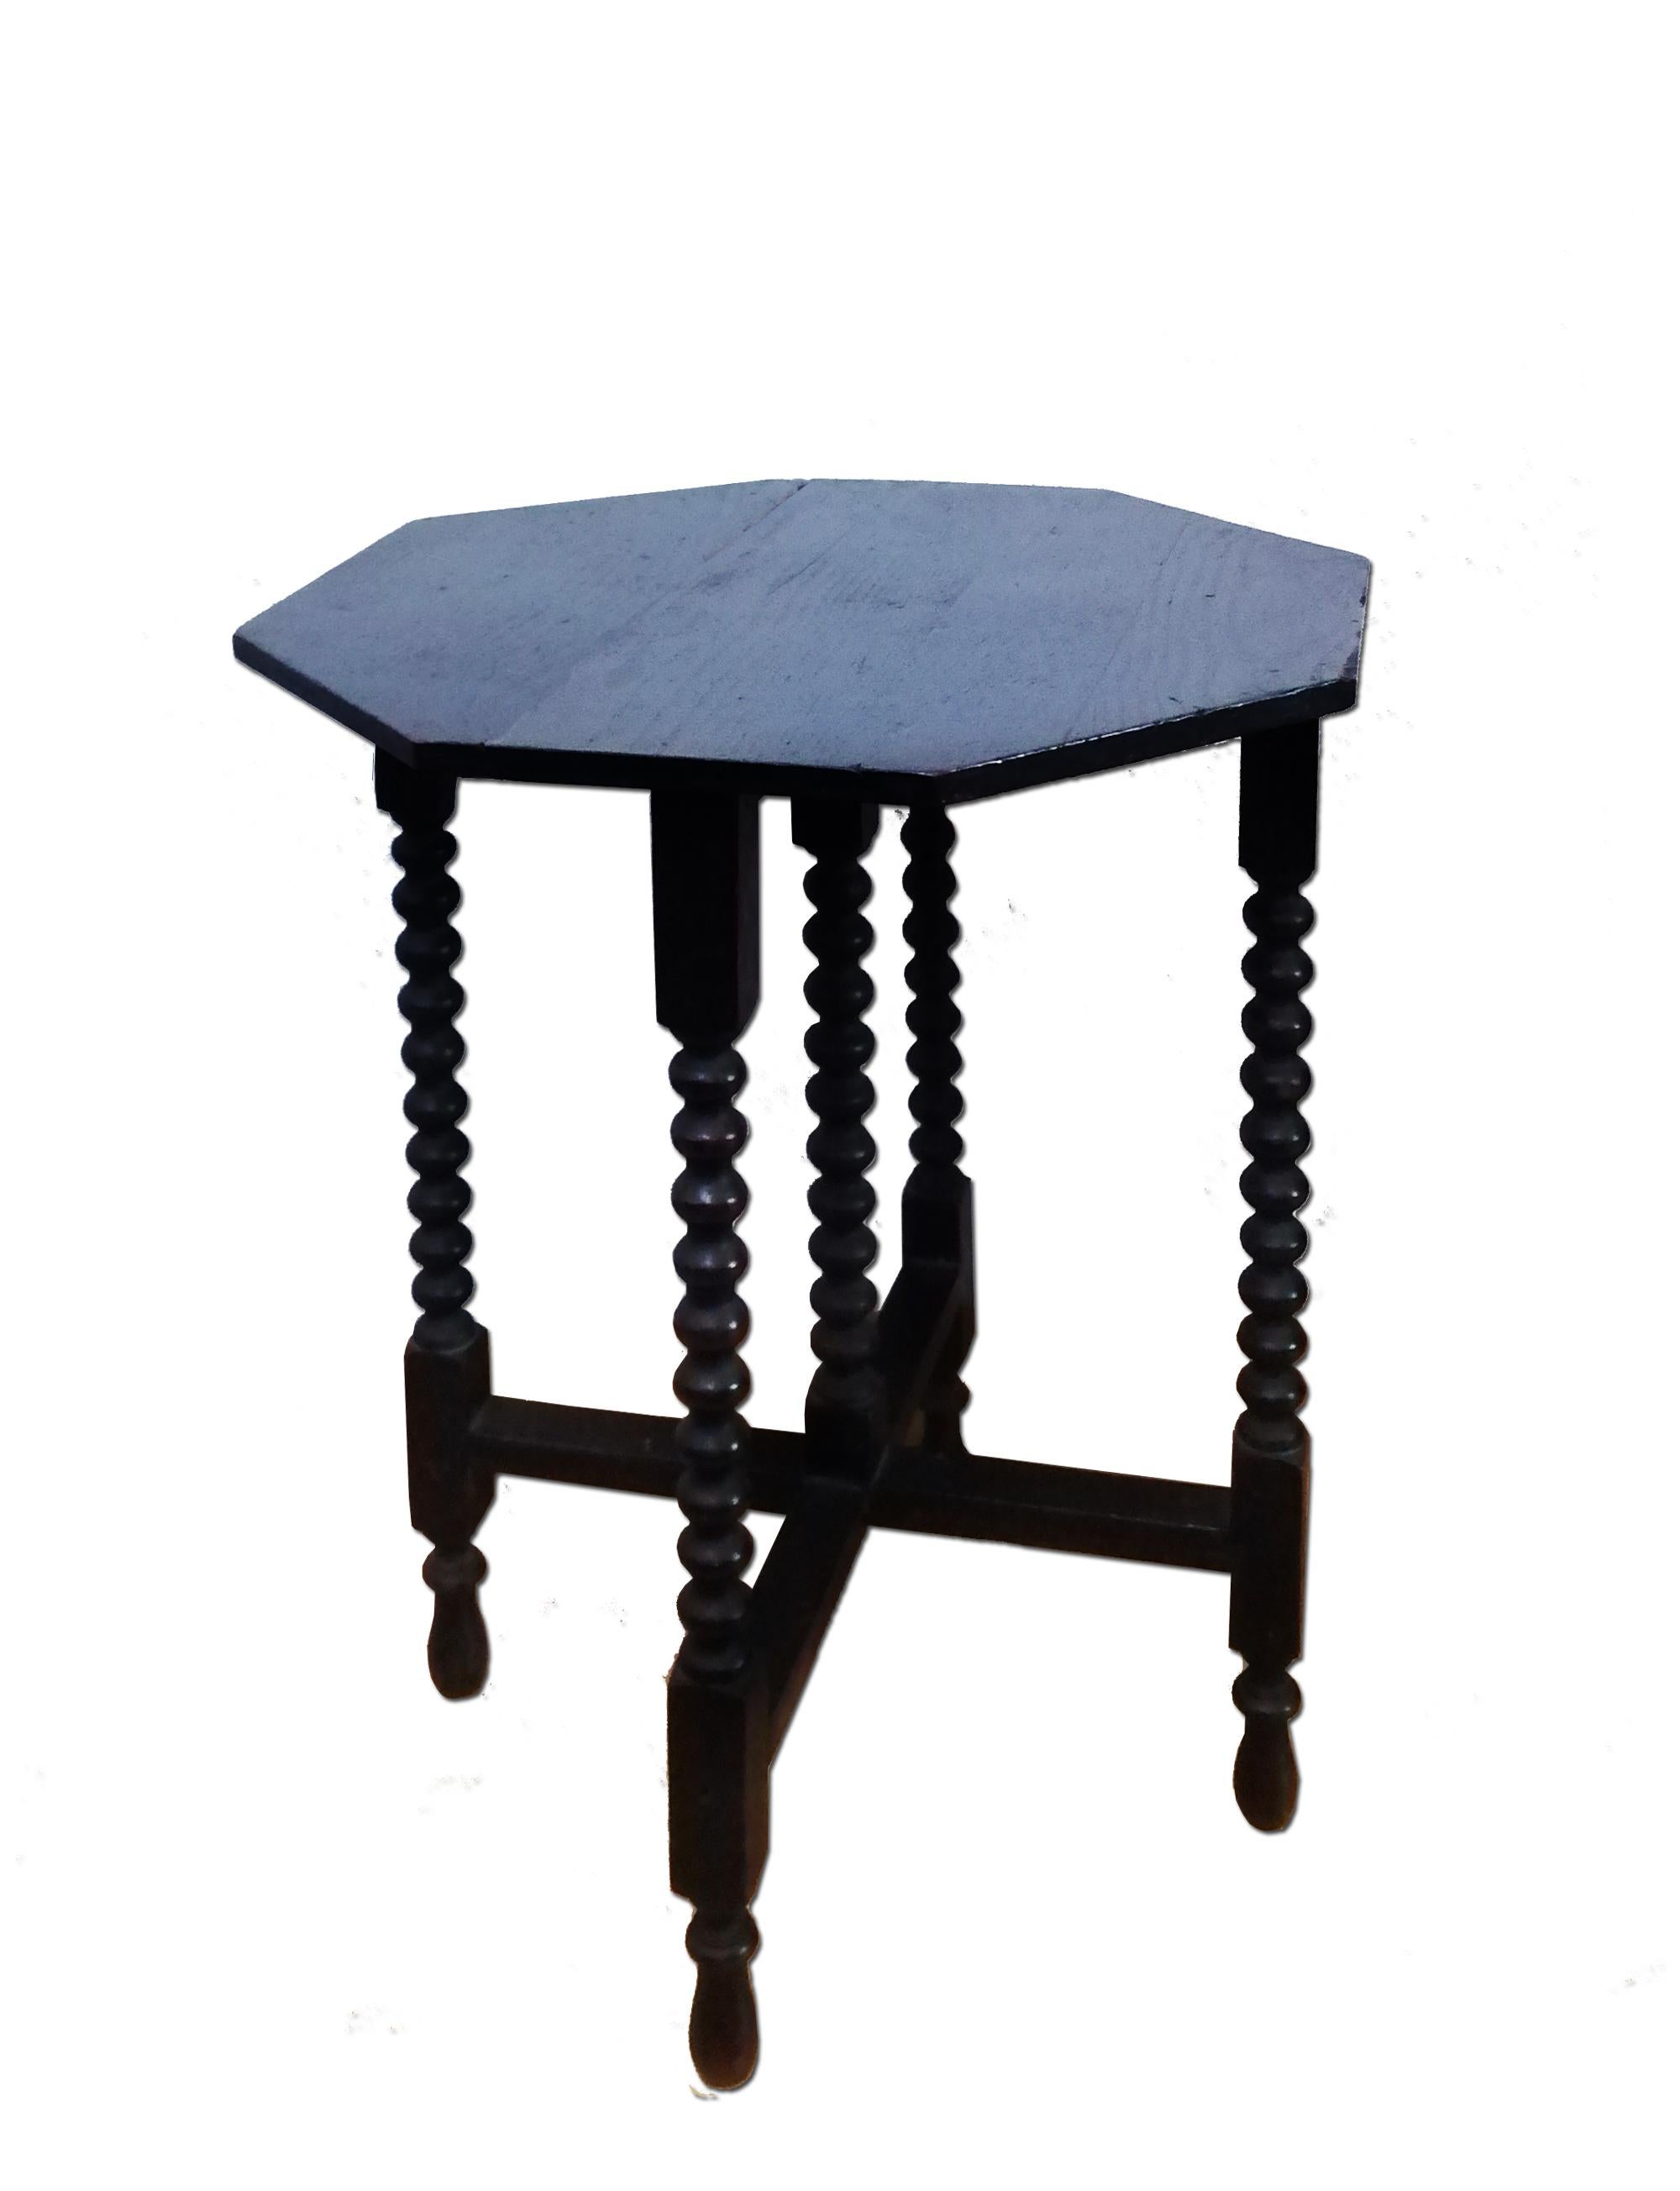 Only until the end of the year
Reasonable offers are welcome

19th century side end vine tables with bobbin turned shape.

They are not equal, they are similar

These tables rise on a base consisting of four turned legs and a smooth cross-shaped